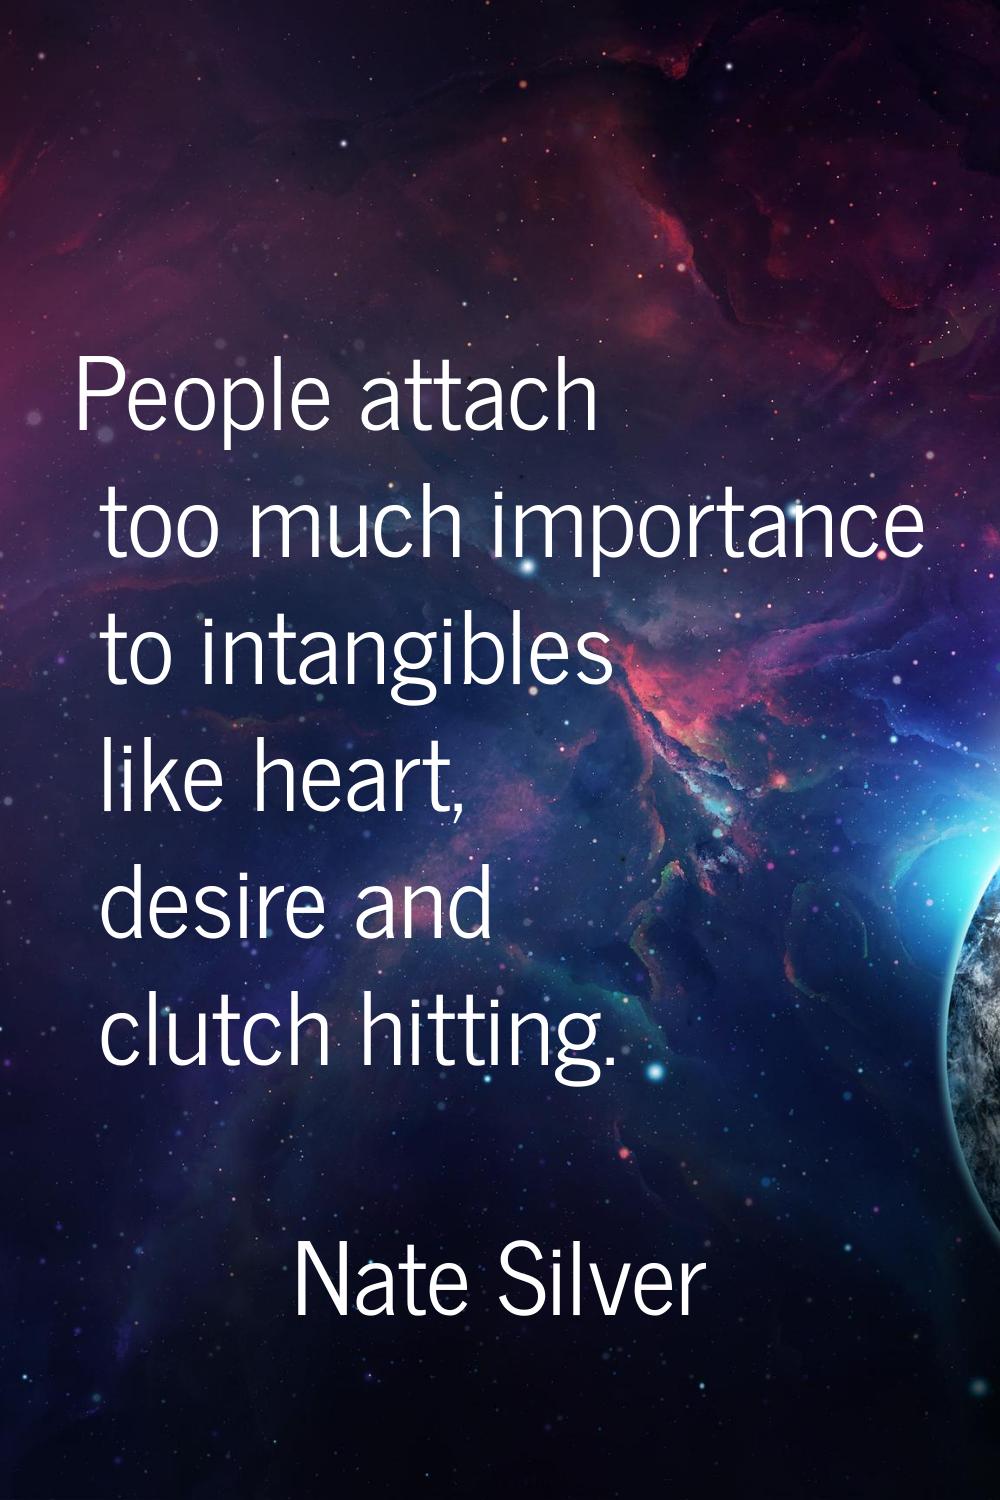 People attach too much importance to intangibles like heart, desire and clutch hitting.